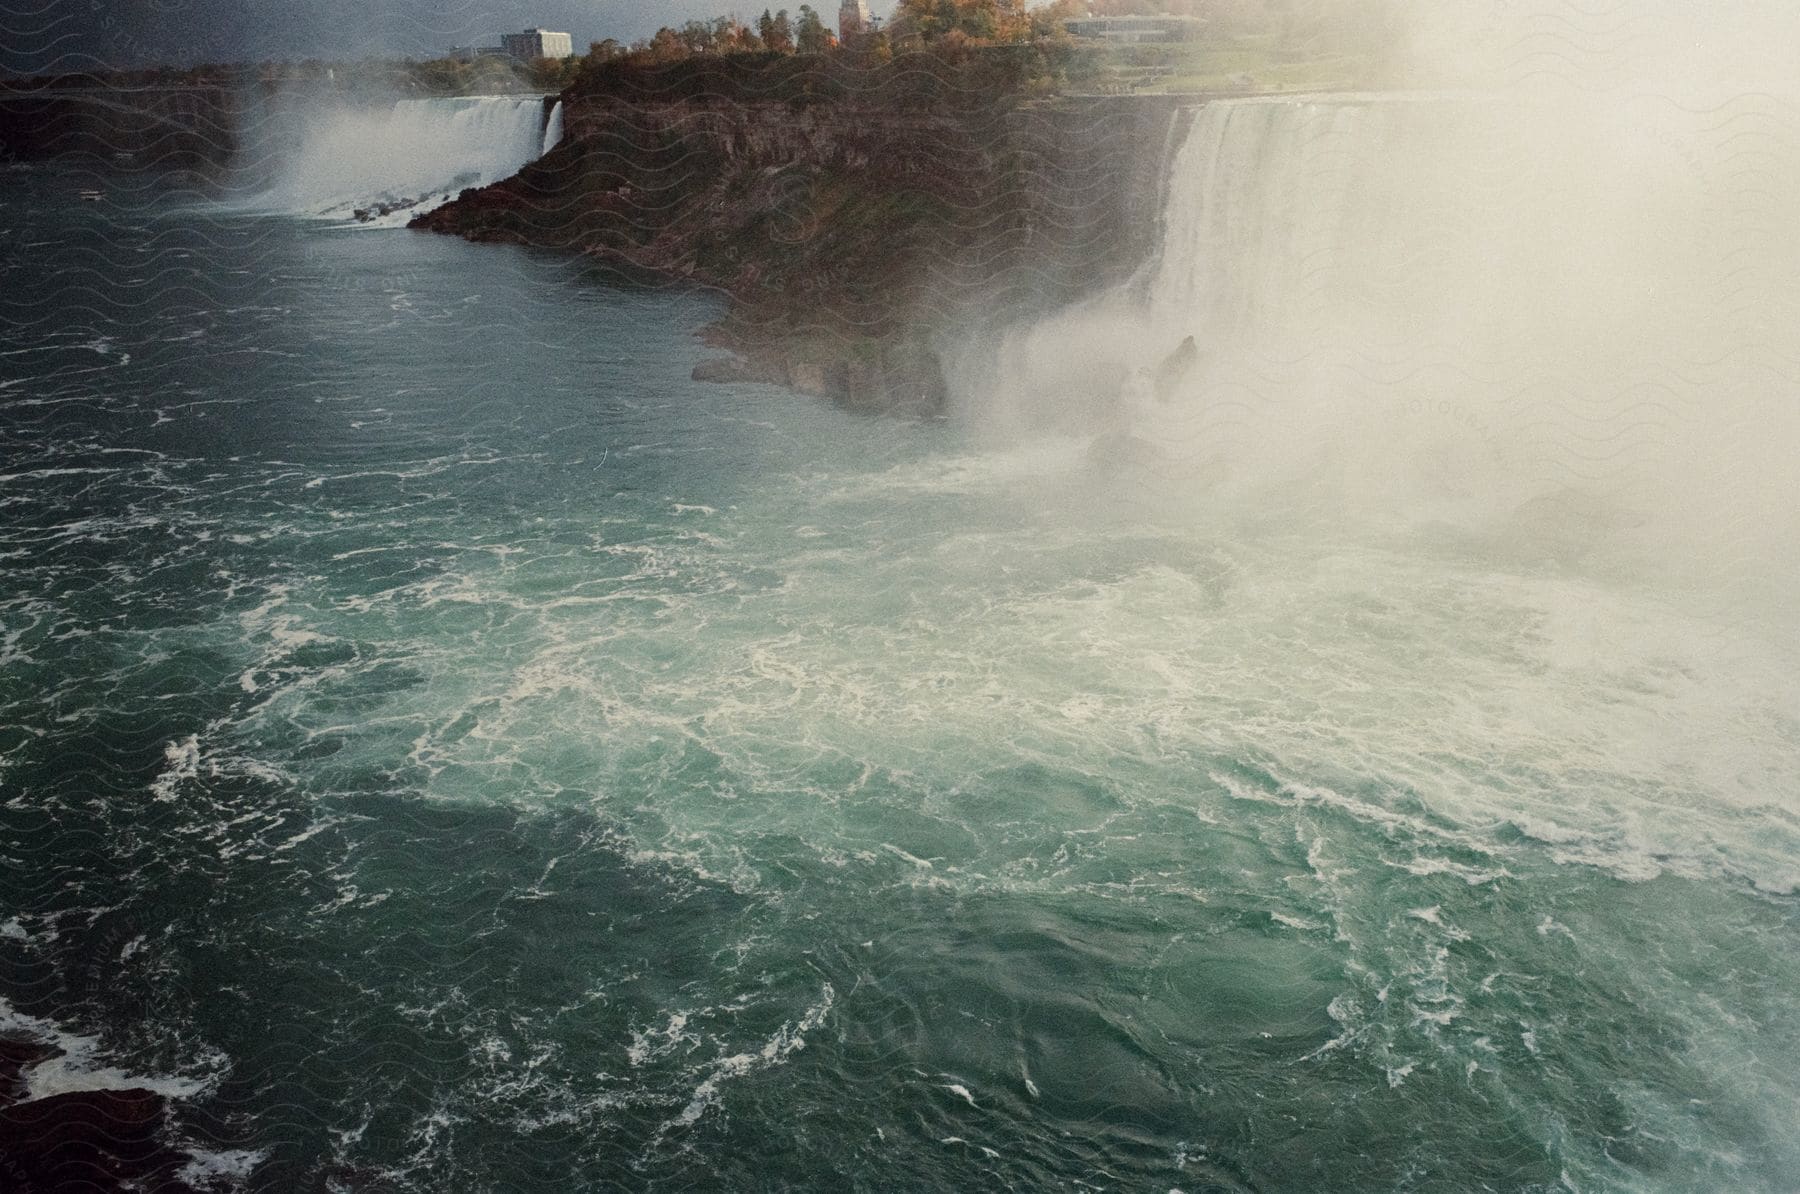 The landscape of Niagara Falls features the powerful rush of water over the cliffs, surrounded by mist